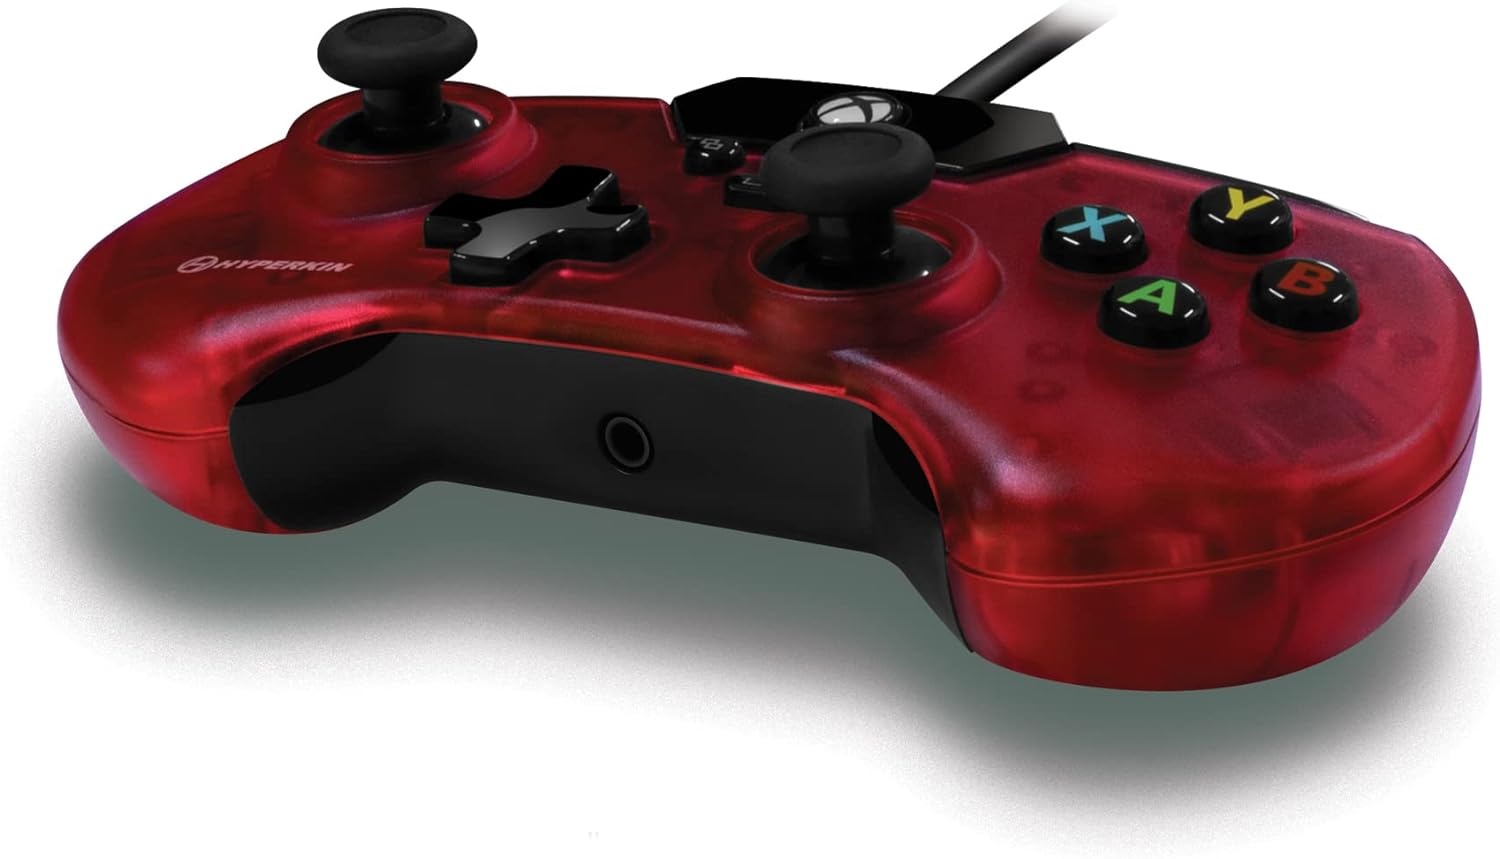 Hyperkin X91 Wired Controller For Xbox - Ruby Red - Excellent